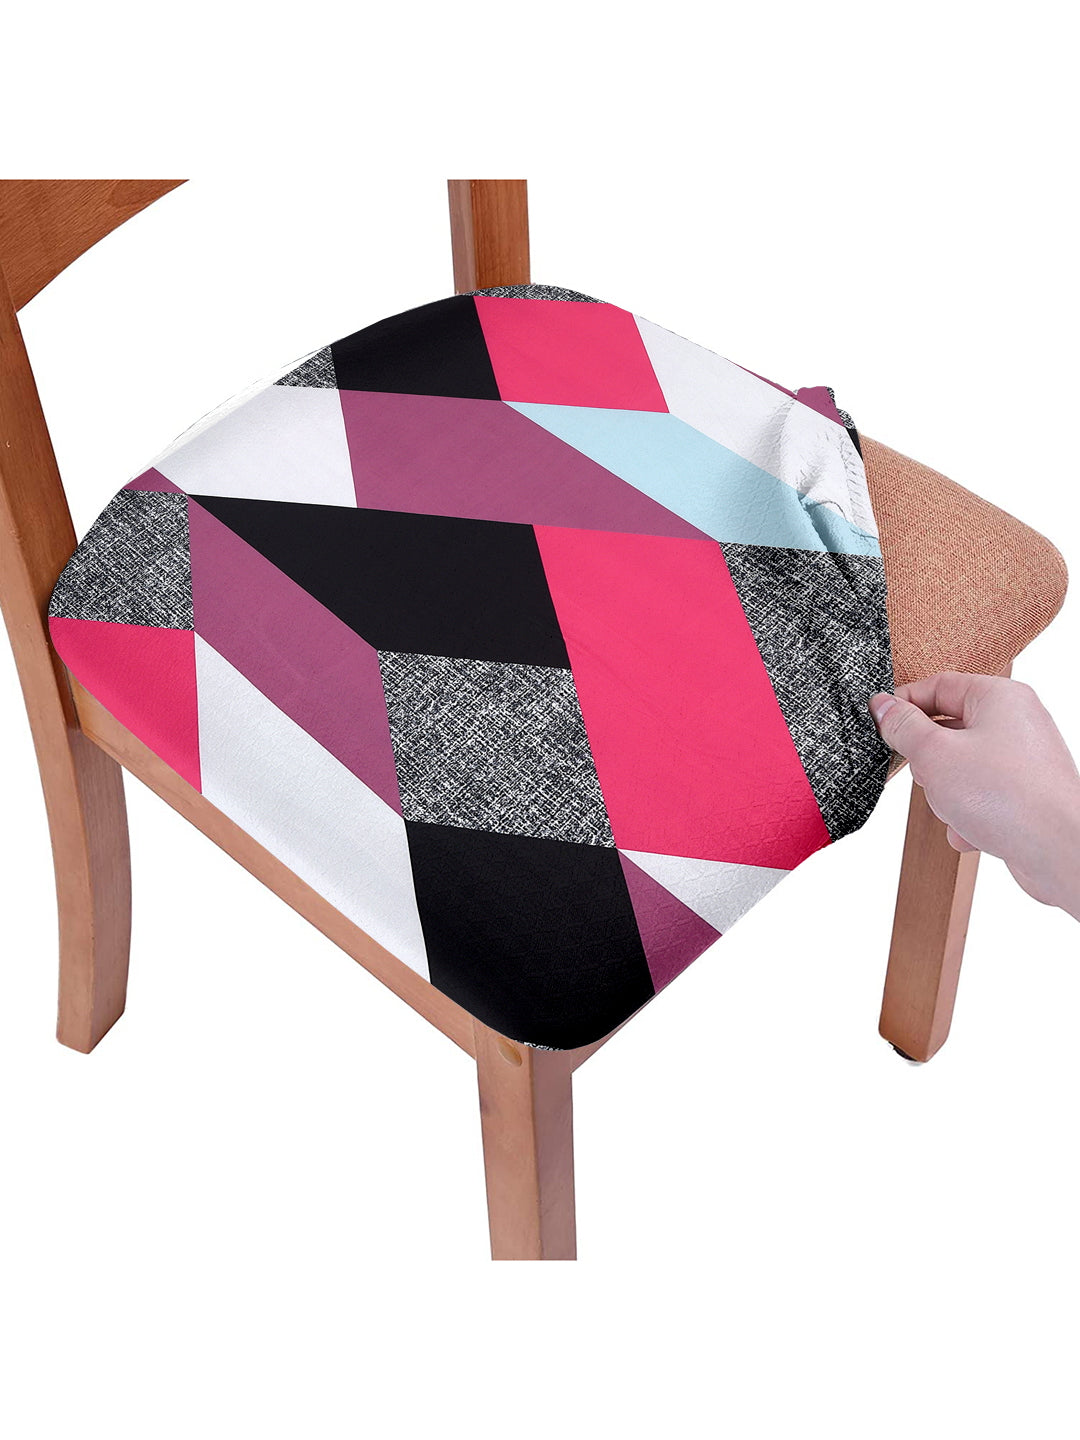 Stretchable Geometric Printed Non Slip Chair Pad Cover Pack of 1-Pink